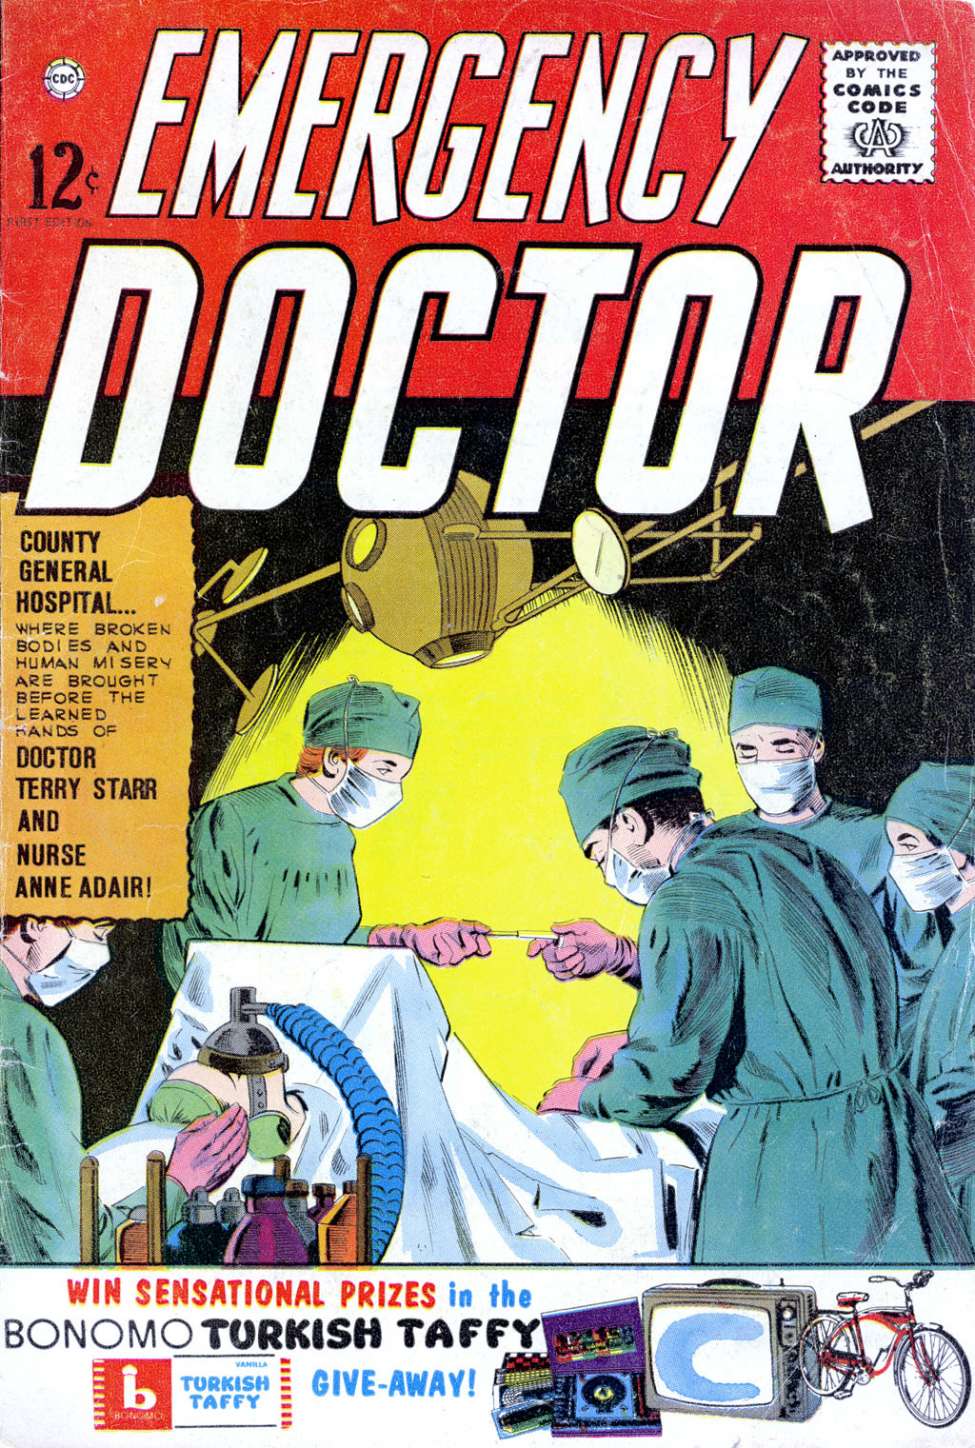 Book Cover For Emergency Doctor 1